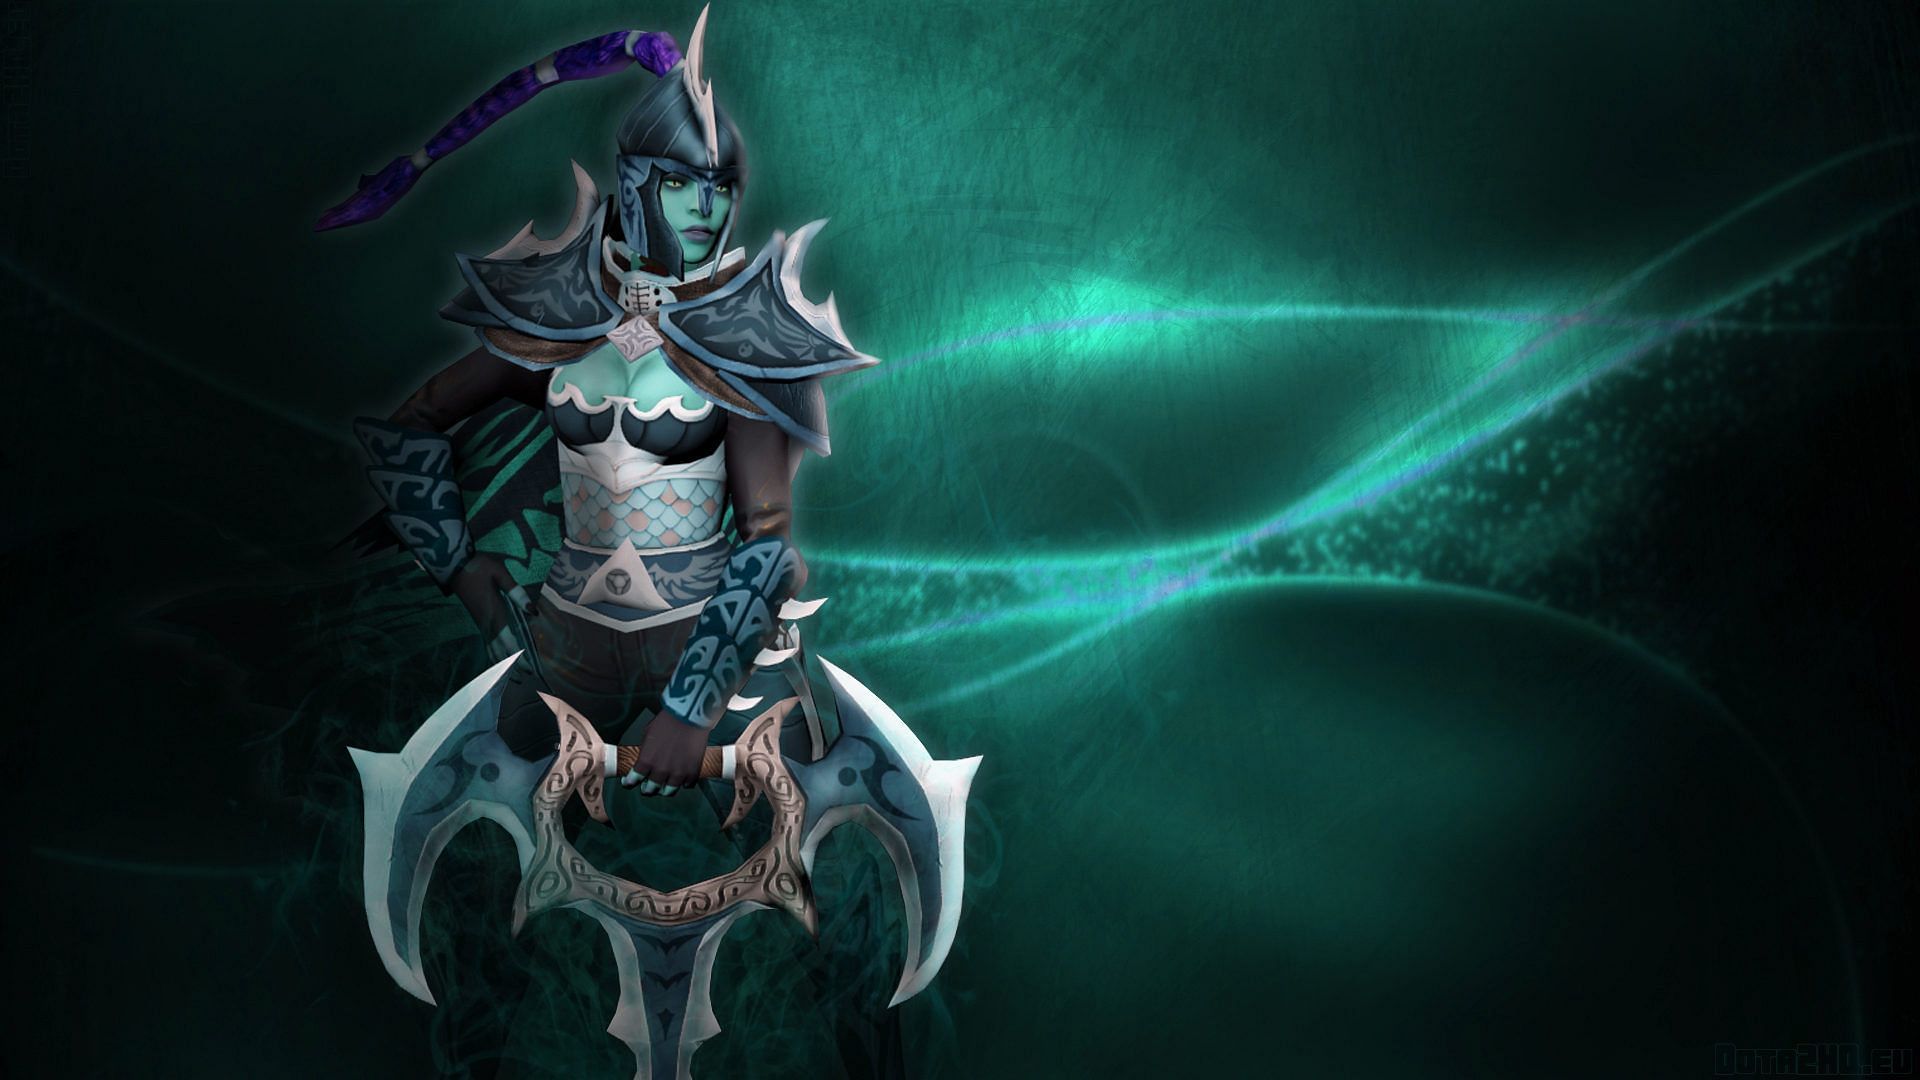 Phantom Assassin strikes from the shadows, her dual blades ready to deliver swift and fatal blows (Image via DOTA 2)